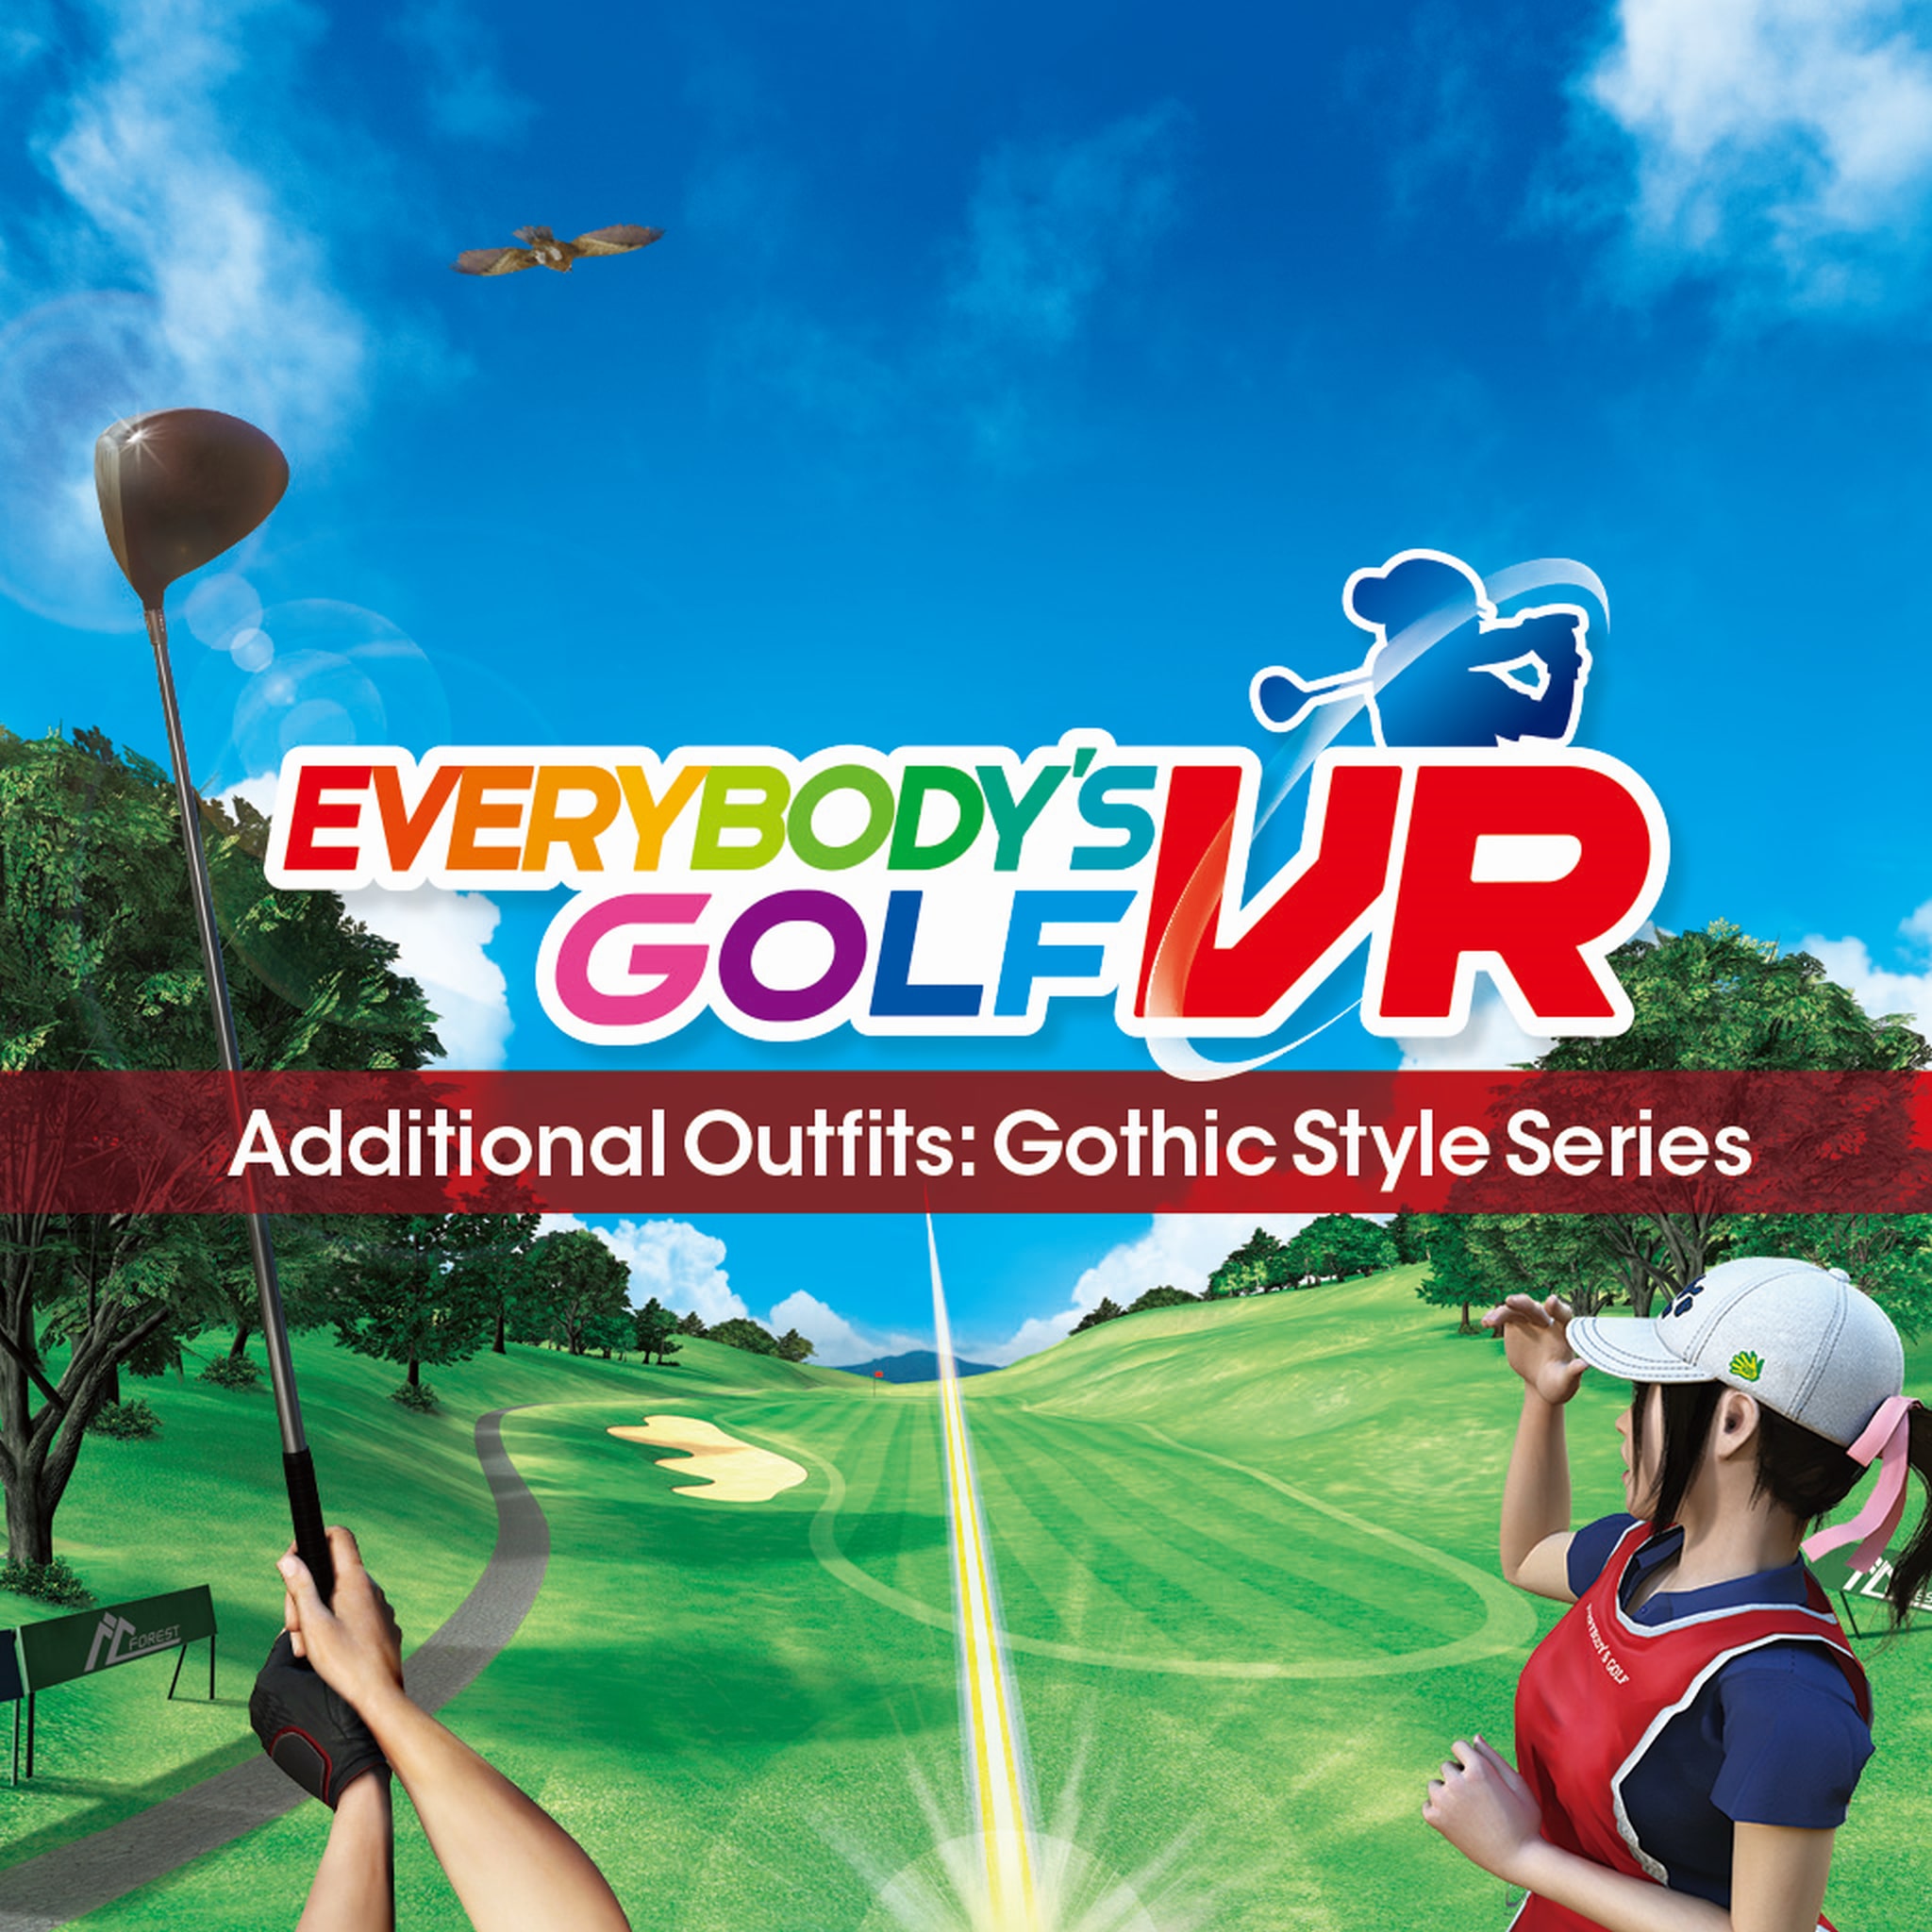 Everybody's Golf VR - Additional Outfits: Gothic Style Series